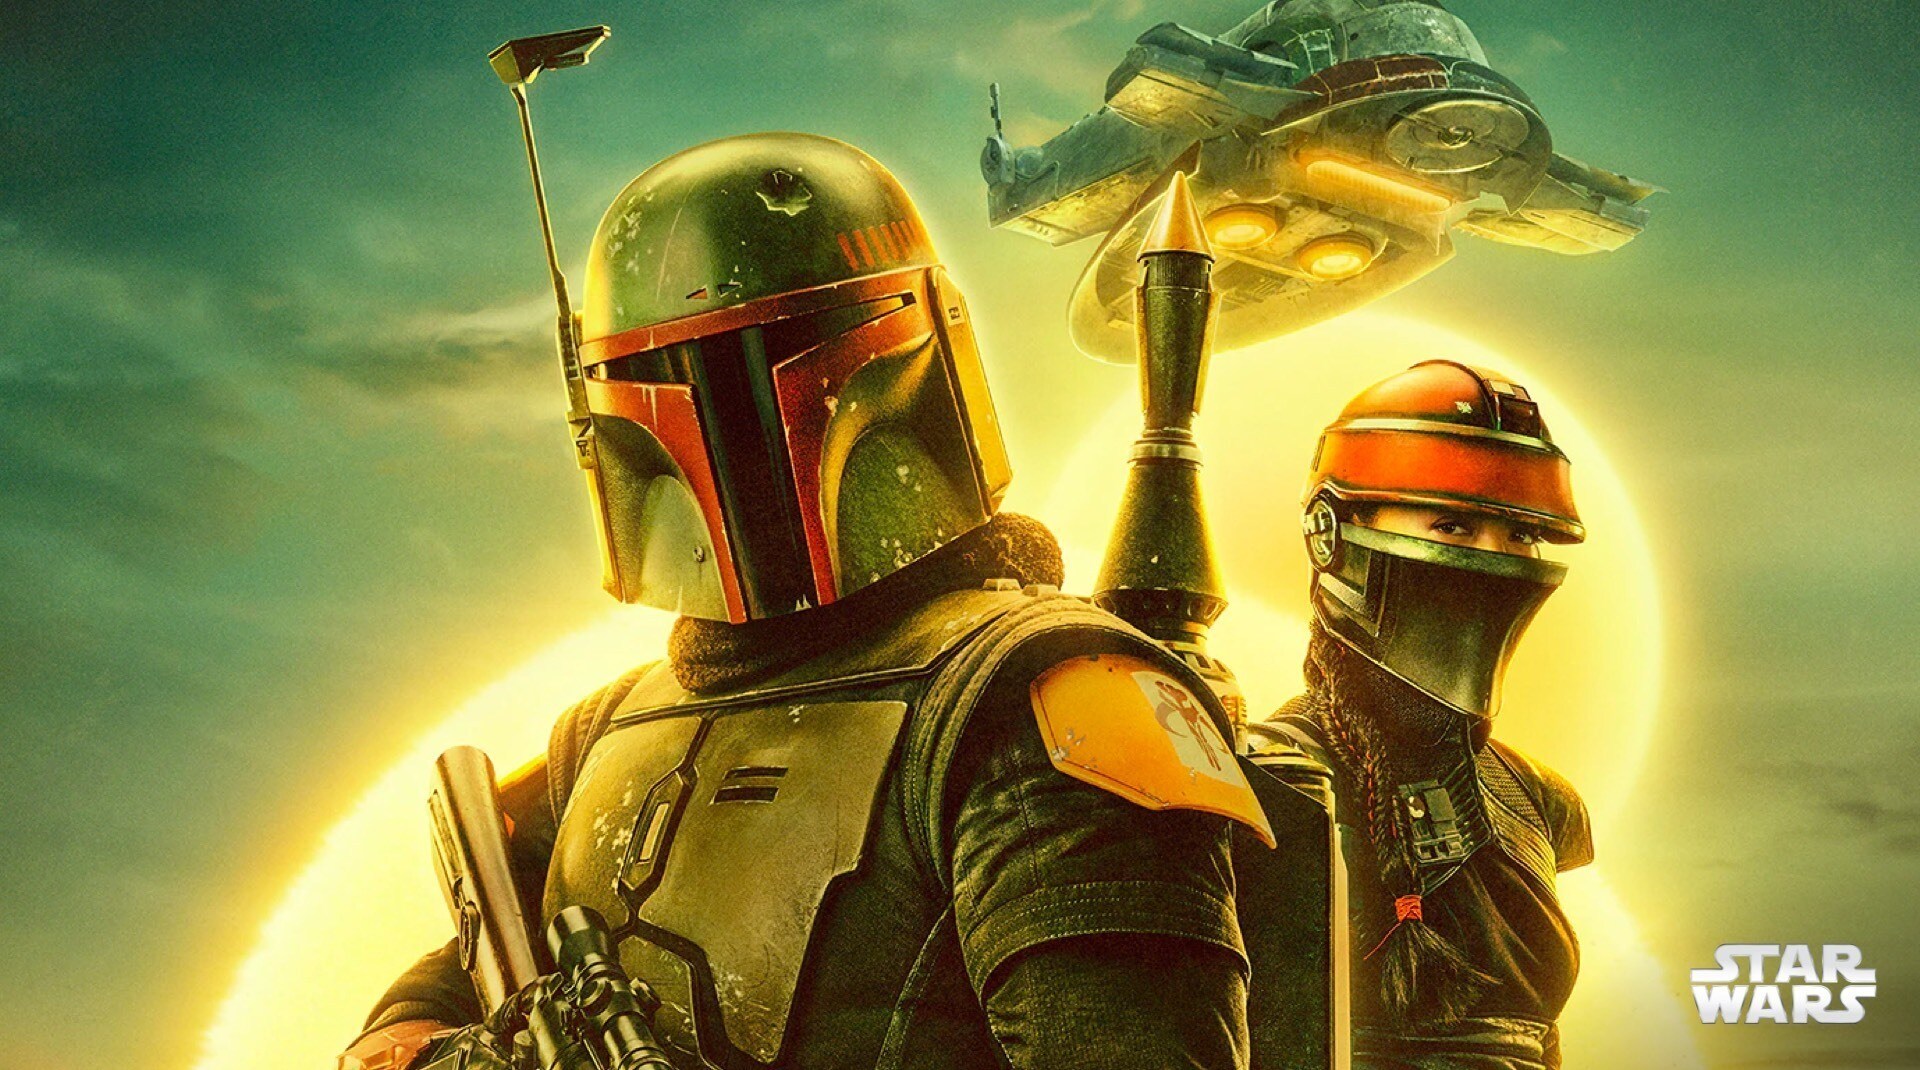 A still image from The Book of Boba Fett